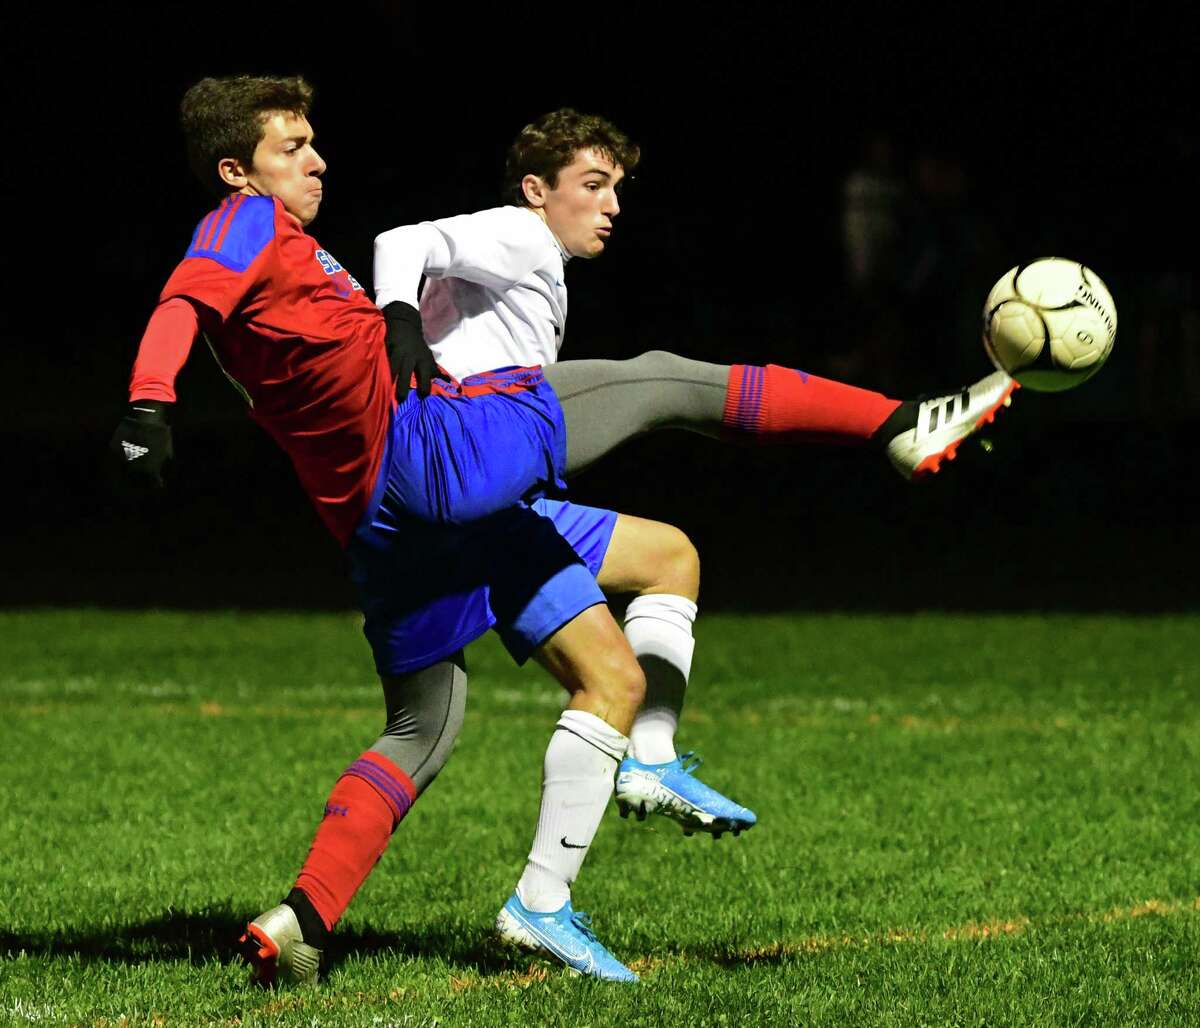 South Glens Falls' Justin Nesbitt, left, battles for the ball with Queensbury's Teddy Borgos during a soccer game on Wednesday, Oct. 2, 2019. The Suburban Council schools won't be able to start their season before March 1. (Lori Van Buren/Times Union)